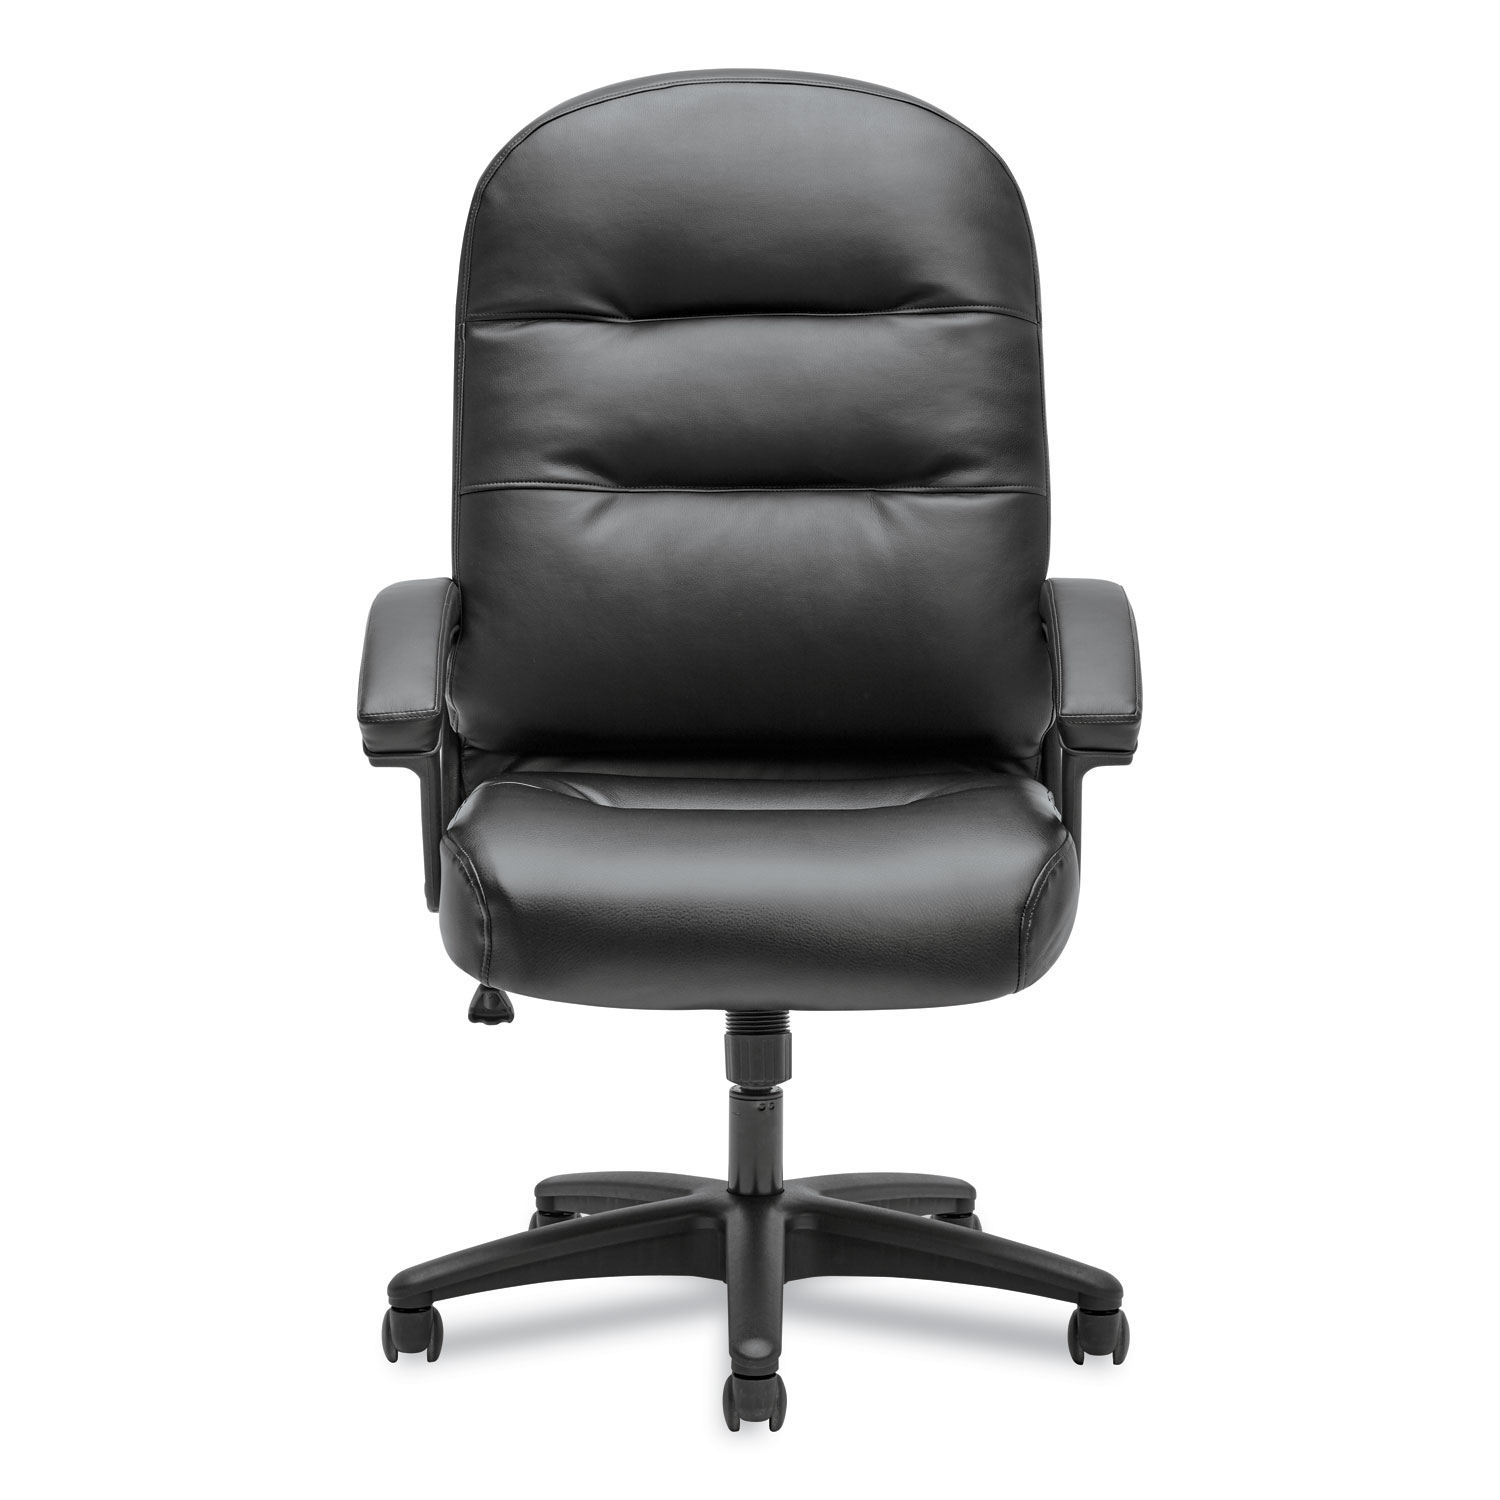  HON H2095.H.PWST11.T Pillow-Soft 2090 Series Executive High-Back Swivel/Tilt Chair, Supports up to 250 lbs., Black Seat/Black Back, Black Base (HON2095HPWST11T) 